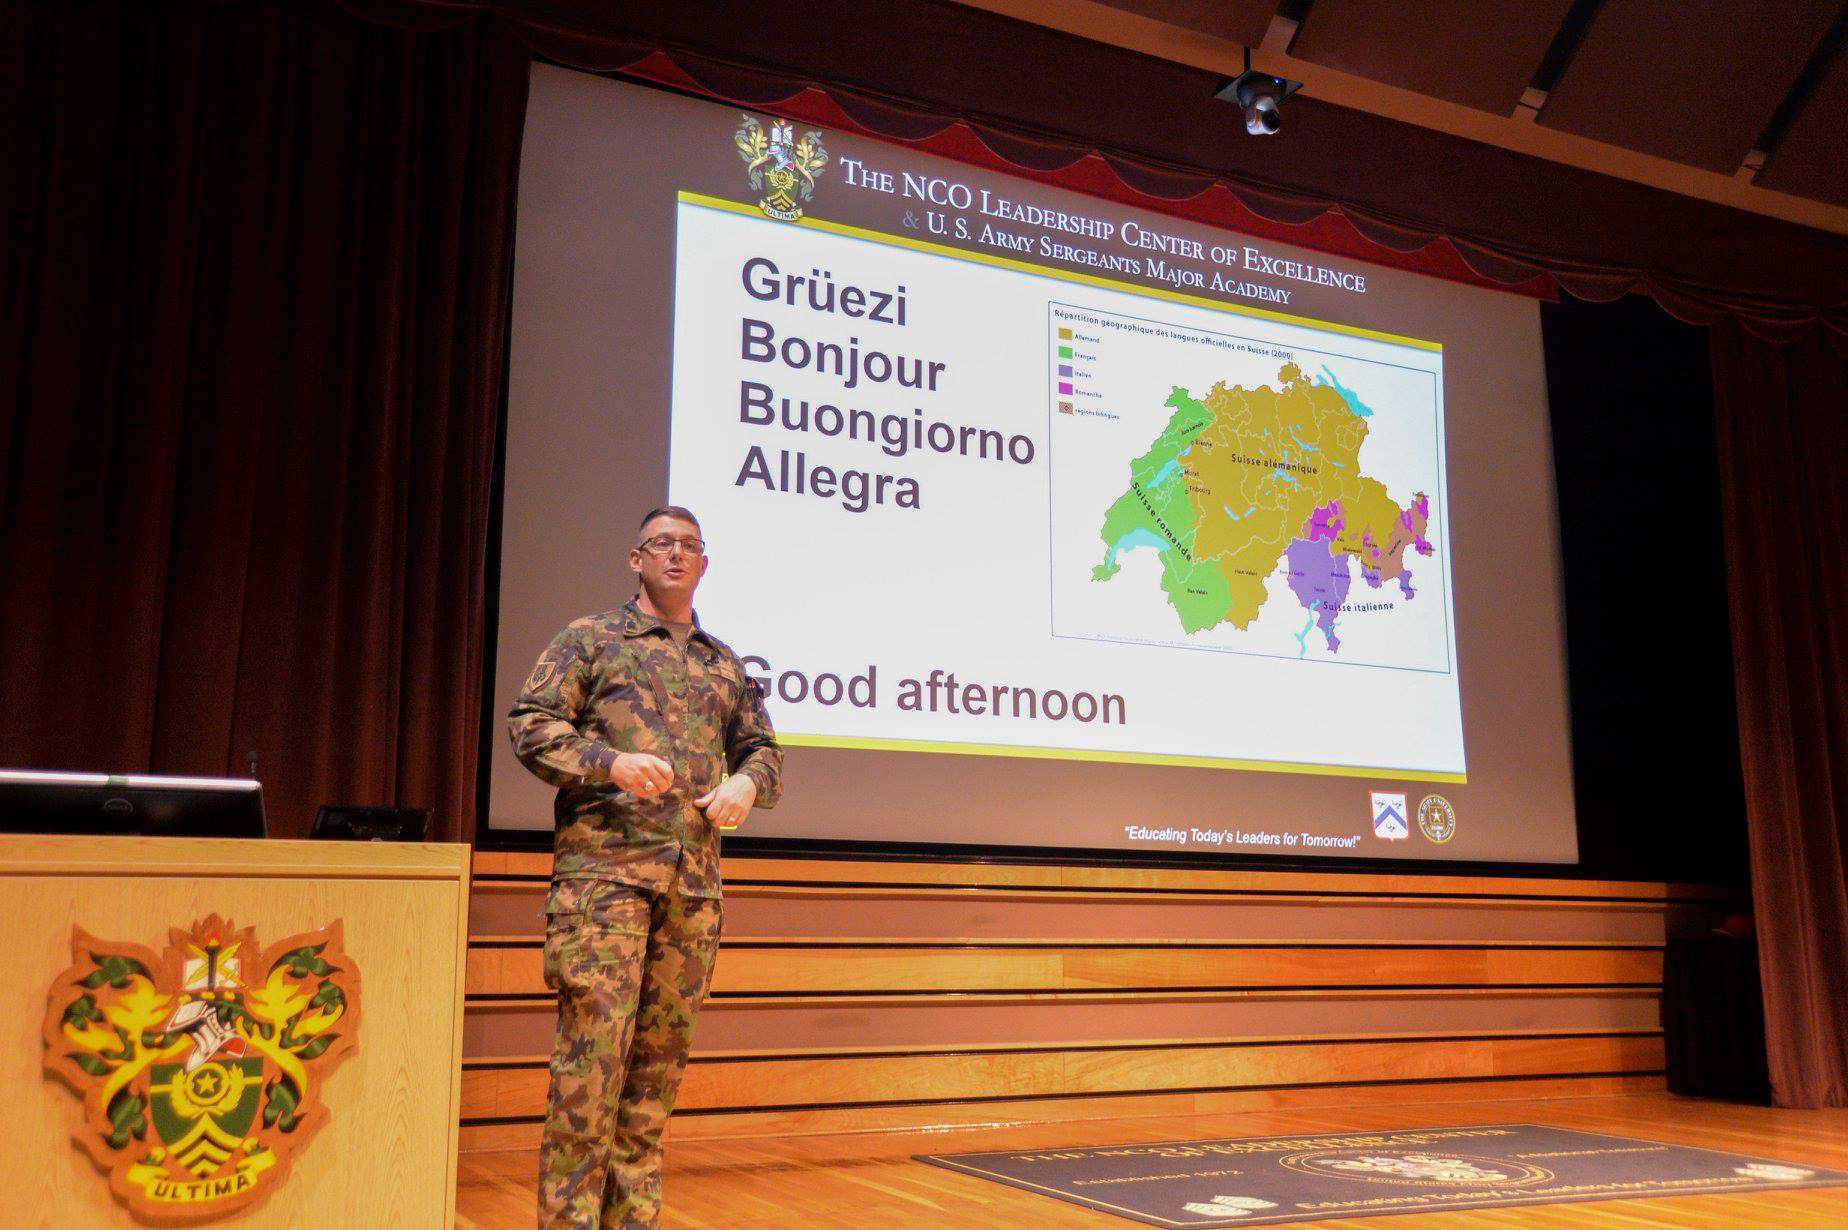 Swiss Armed Forces Sgt. Maj. Florian Emonet, gives a presentation at the U.S. Army NCO Leadership Center of Excellence